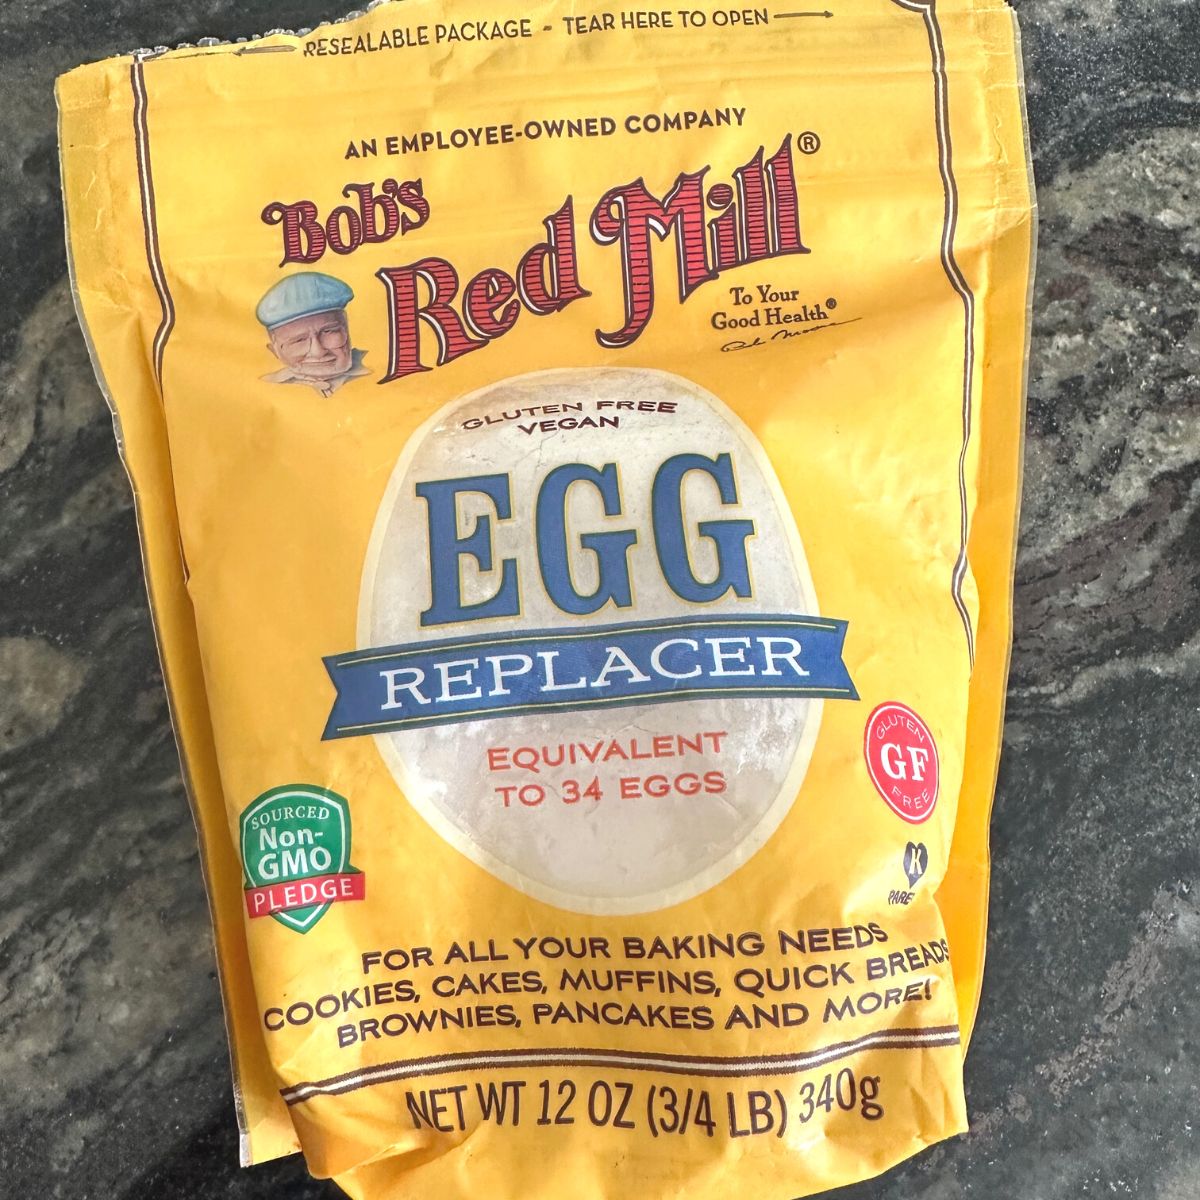 A photo of my package of Bob's Red Mill Egg Replacer.